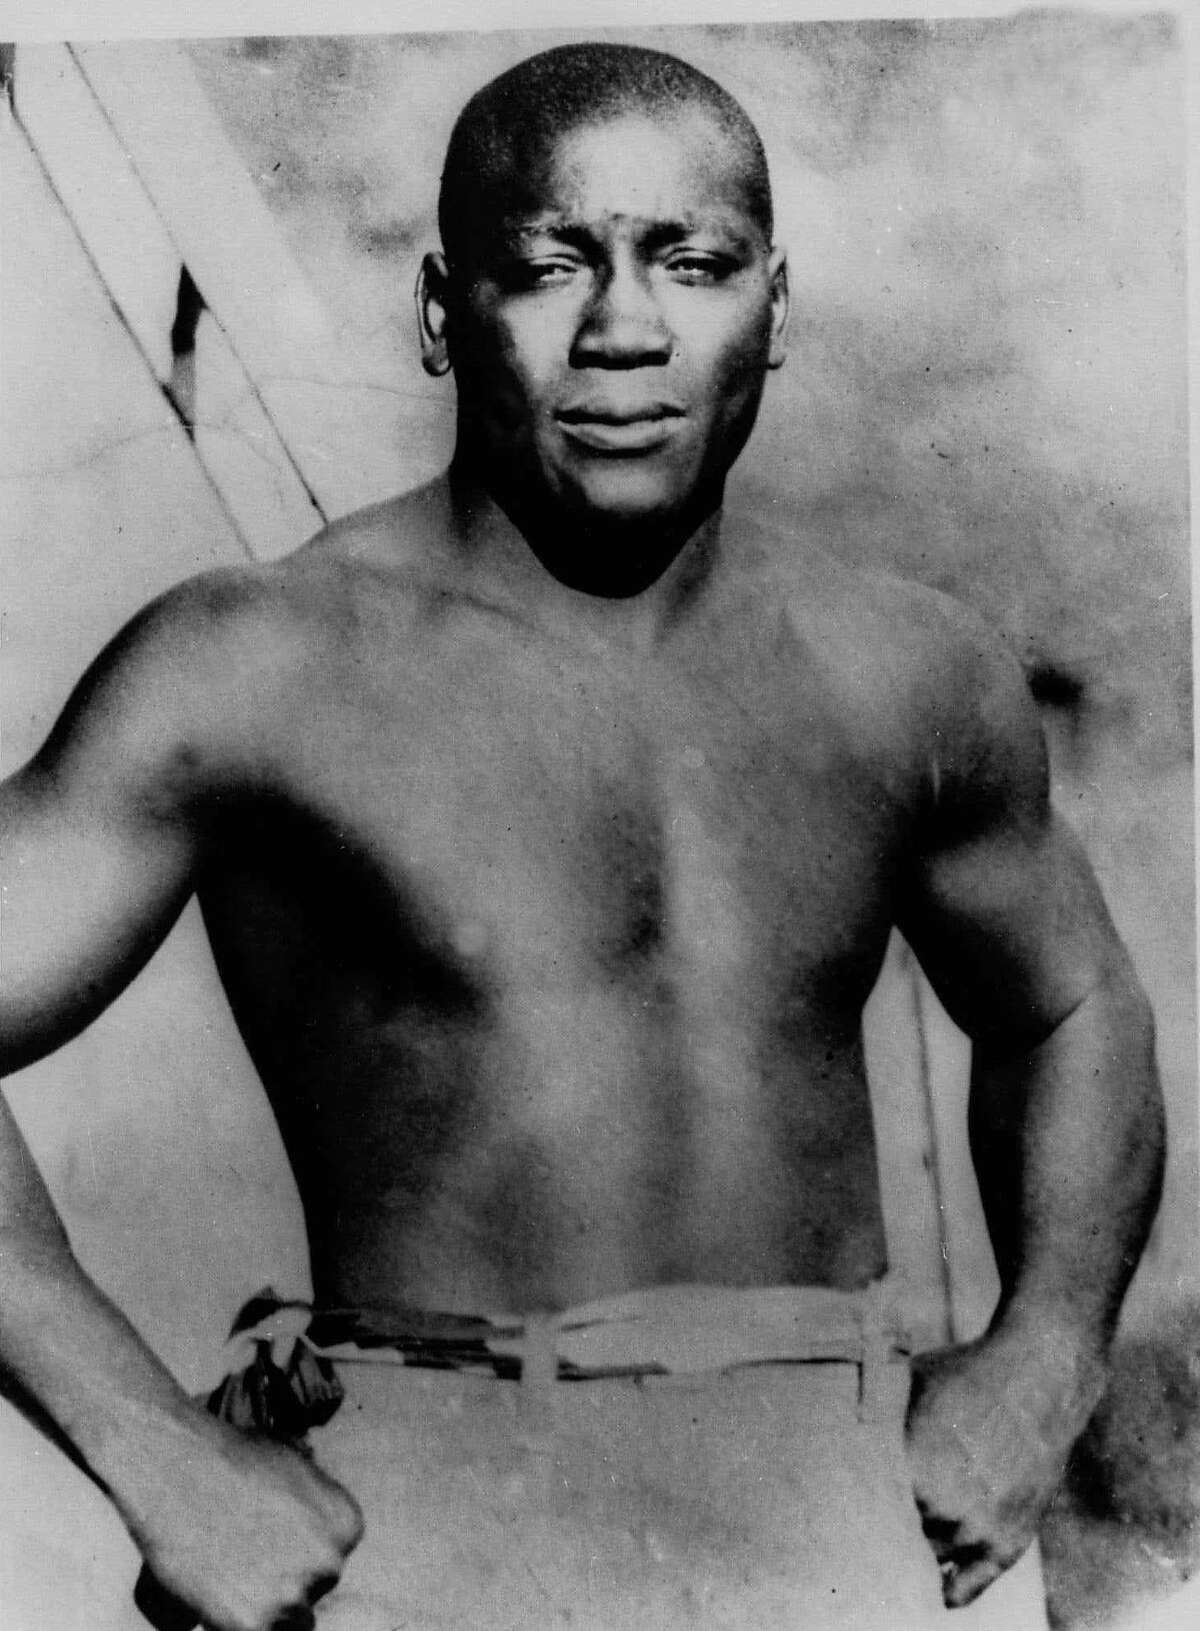 FILE - This undated photo shows boxer Jack Johnson. President Donald Trump says he's considering "a Full Pardon!" for boxing's first black heavyweight champion more than 100 years after Jack Johnson was convicted by all-white jury of "immorality" for one of his relationships. Trump tweets that the actor Sylvester Stallone called him to share Johnson's story. Trump says Johnson's "trials and tribulations were great, his life complex and controversial." The president adds: "Others have looked at this over the years, most thought it would be done, but yes, I am considering a Full Pardon!" (AP Photo/File